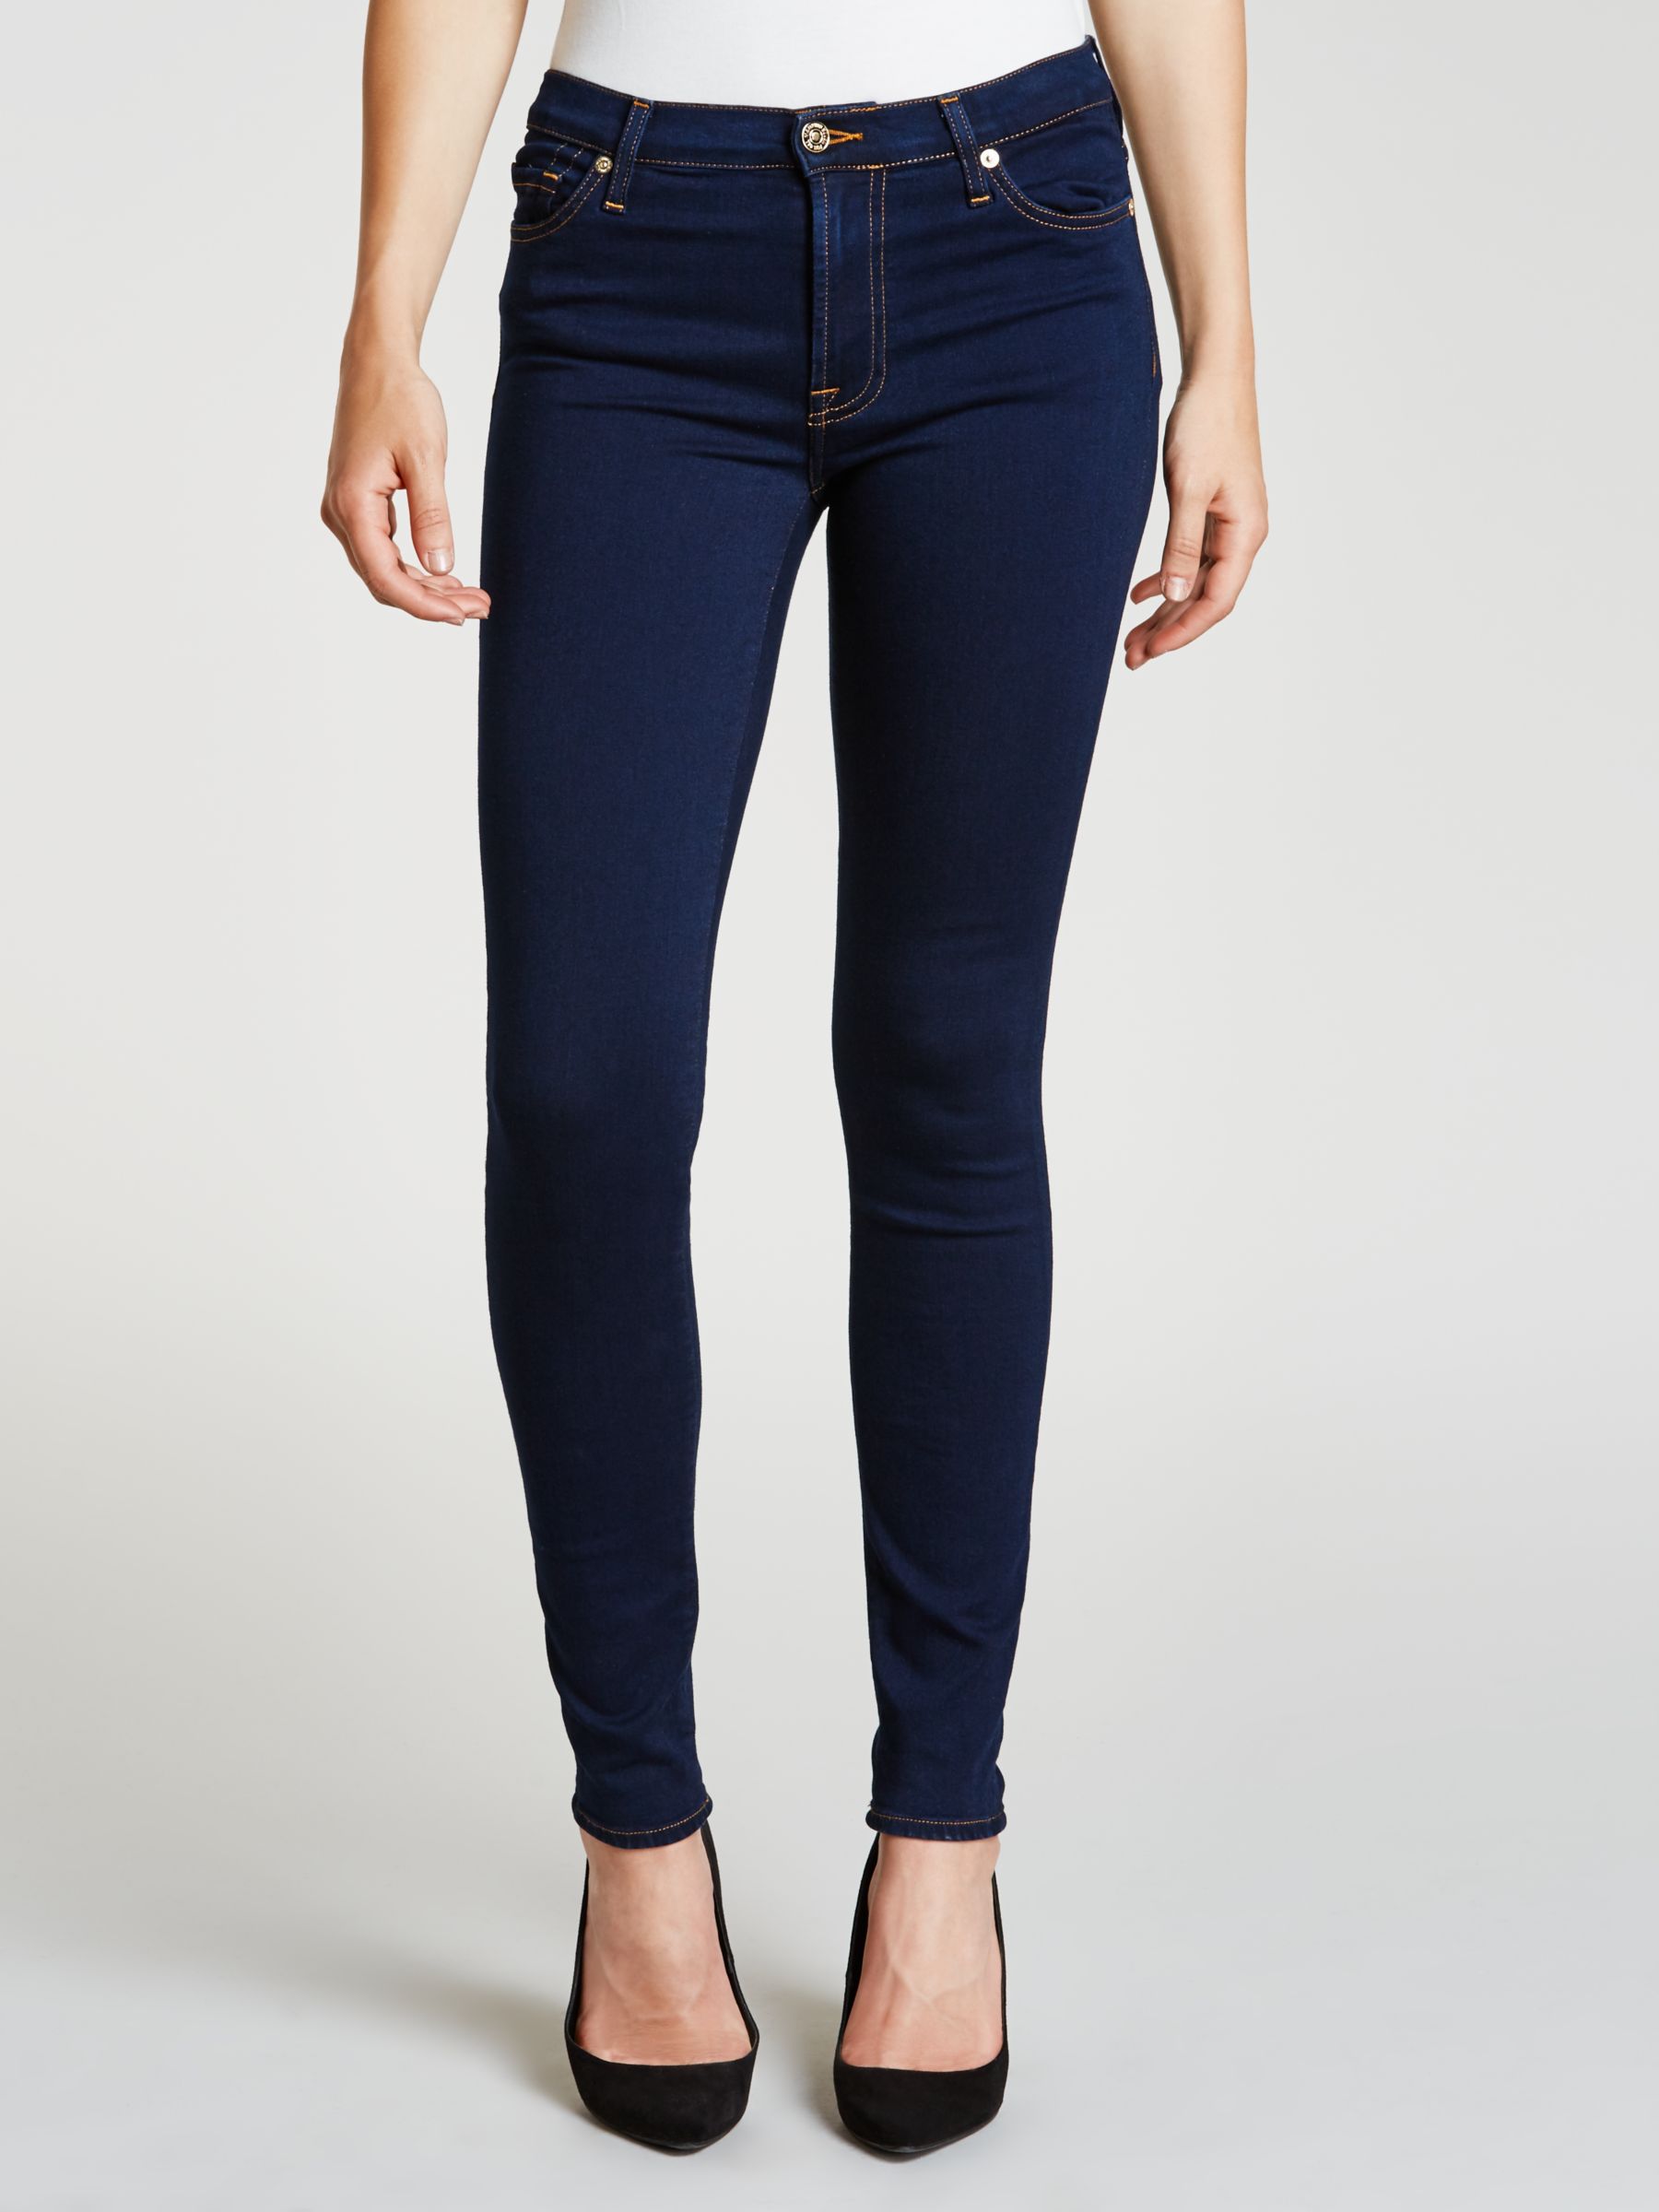 7 For All Mankind High Waist Skinny Slim Illusion Jeans, Luxe Rinsed ...